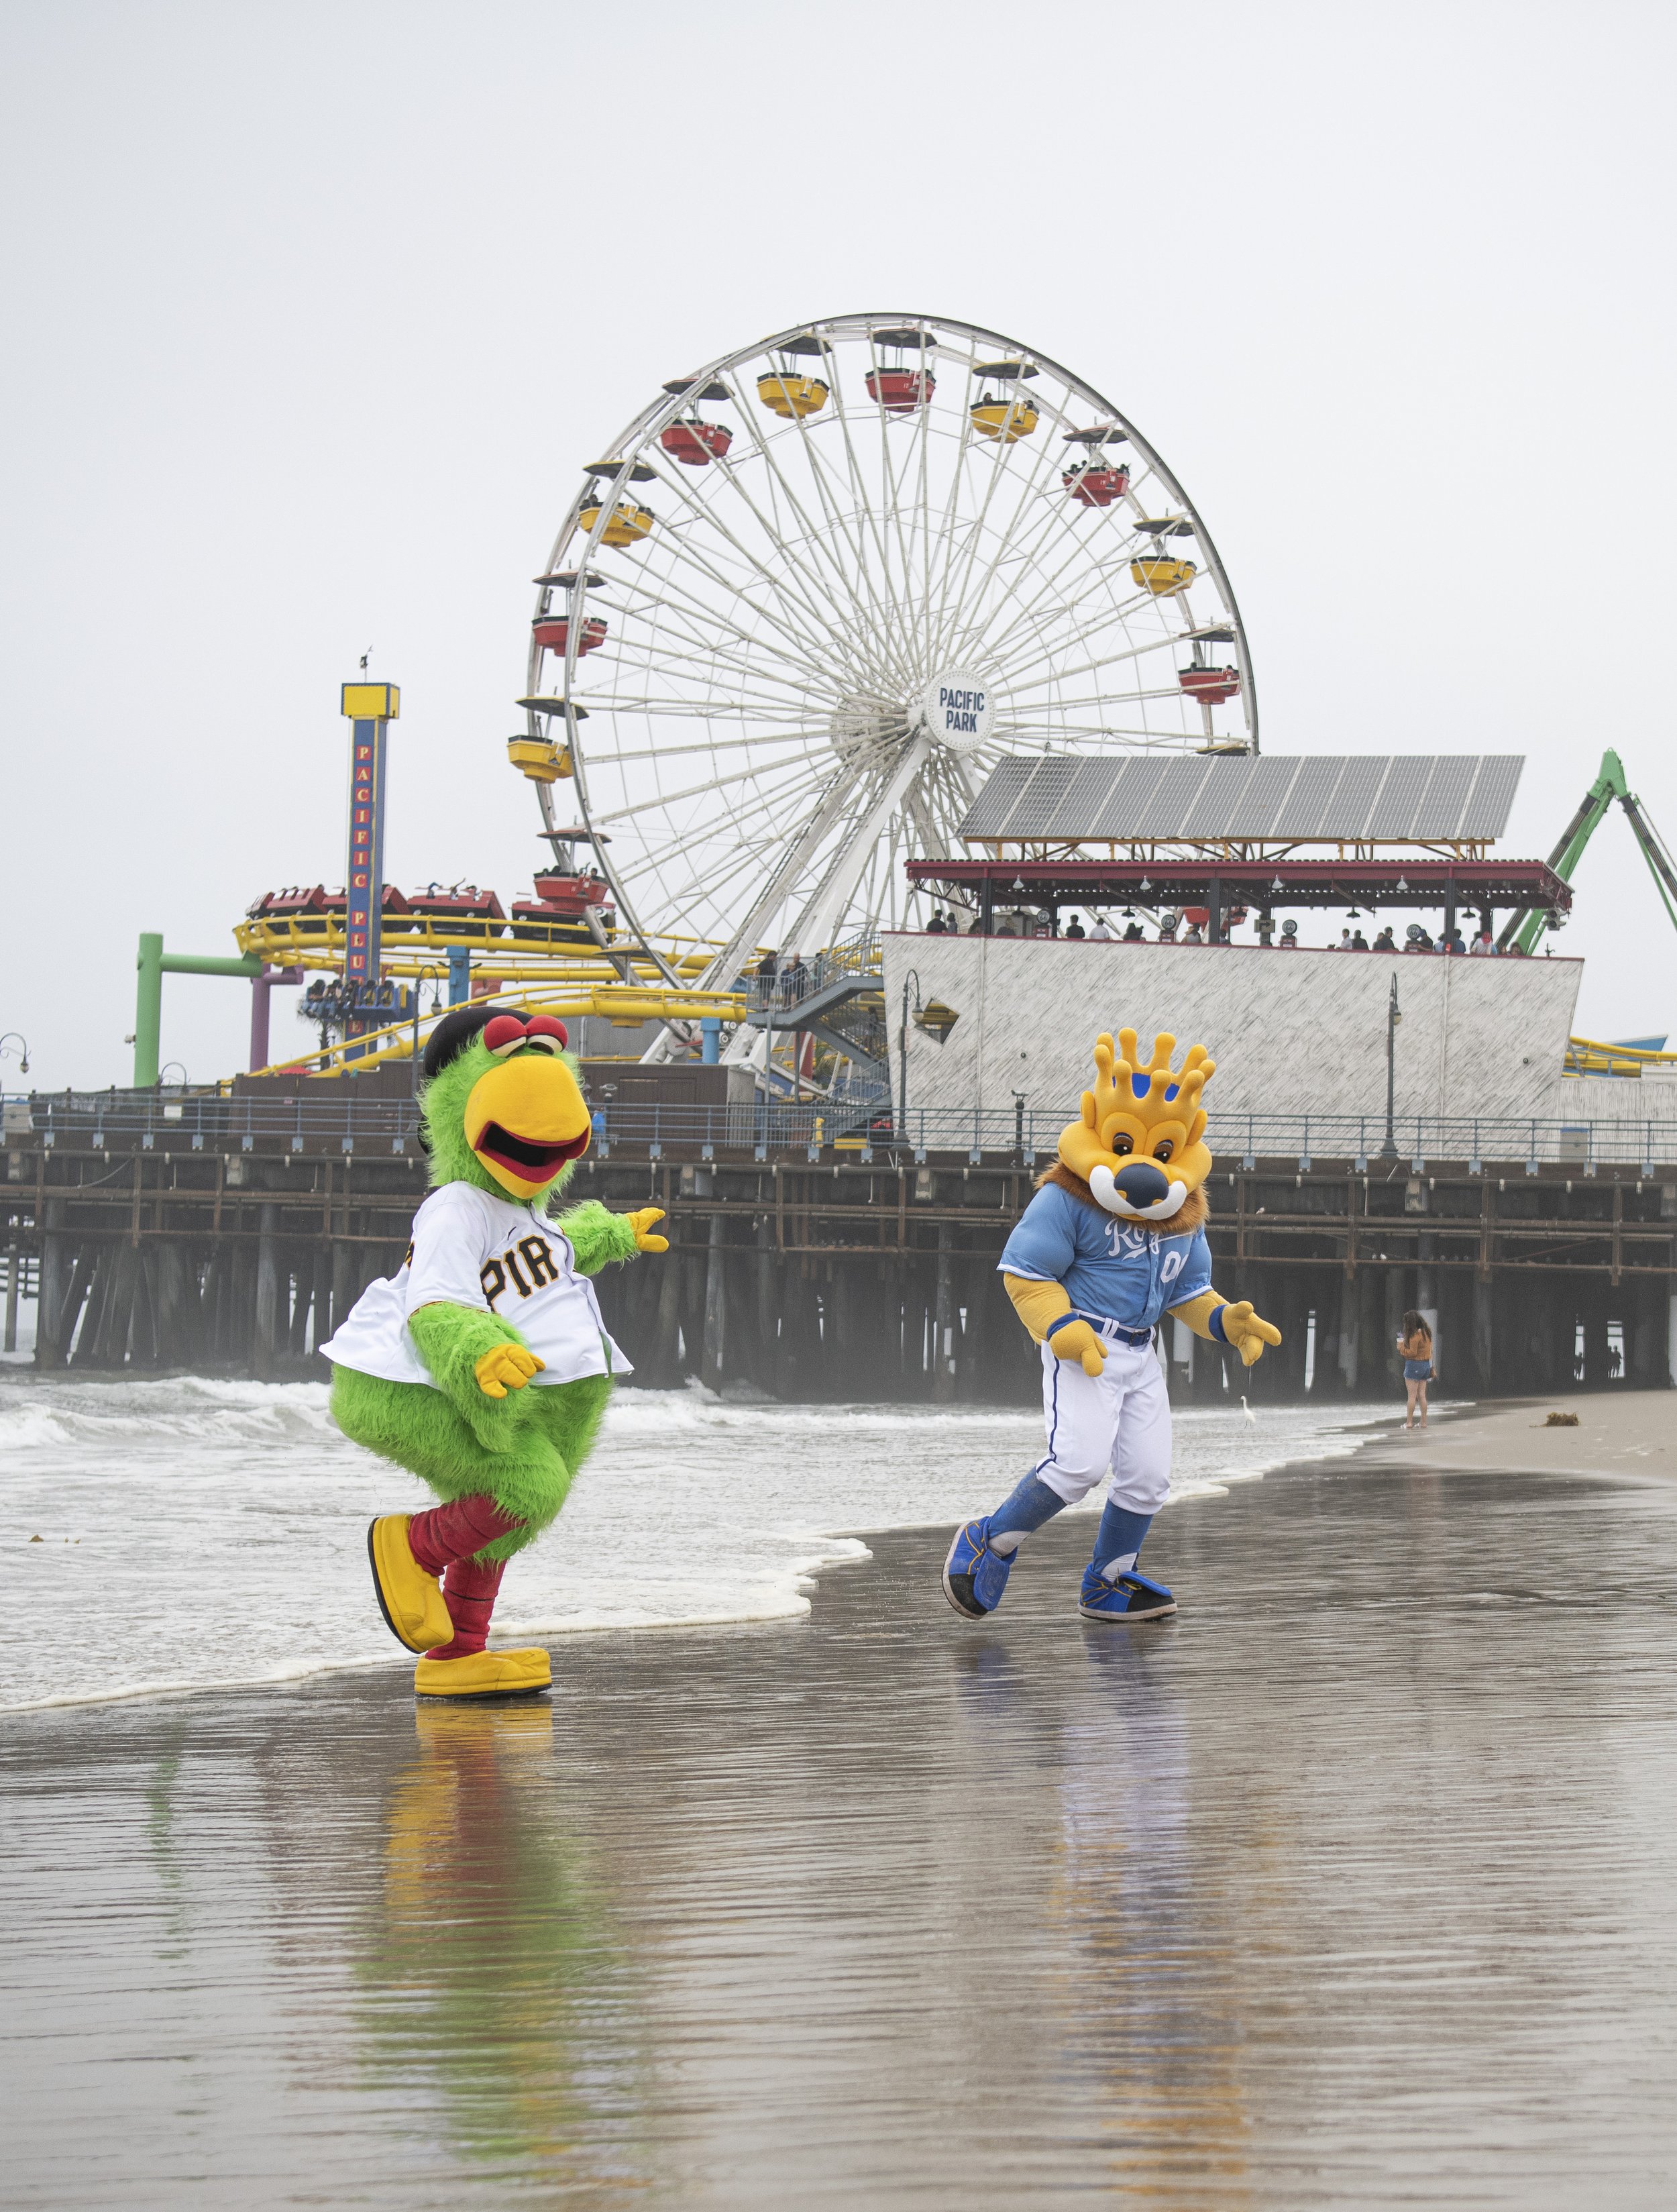  Pirate Parrot (left) and Sluggerrr the Kansas City Royals Mascott flee as the water approaches them in front of the Santa Monica Pier. (Jon Putman | The Corsair) 